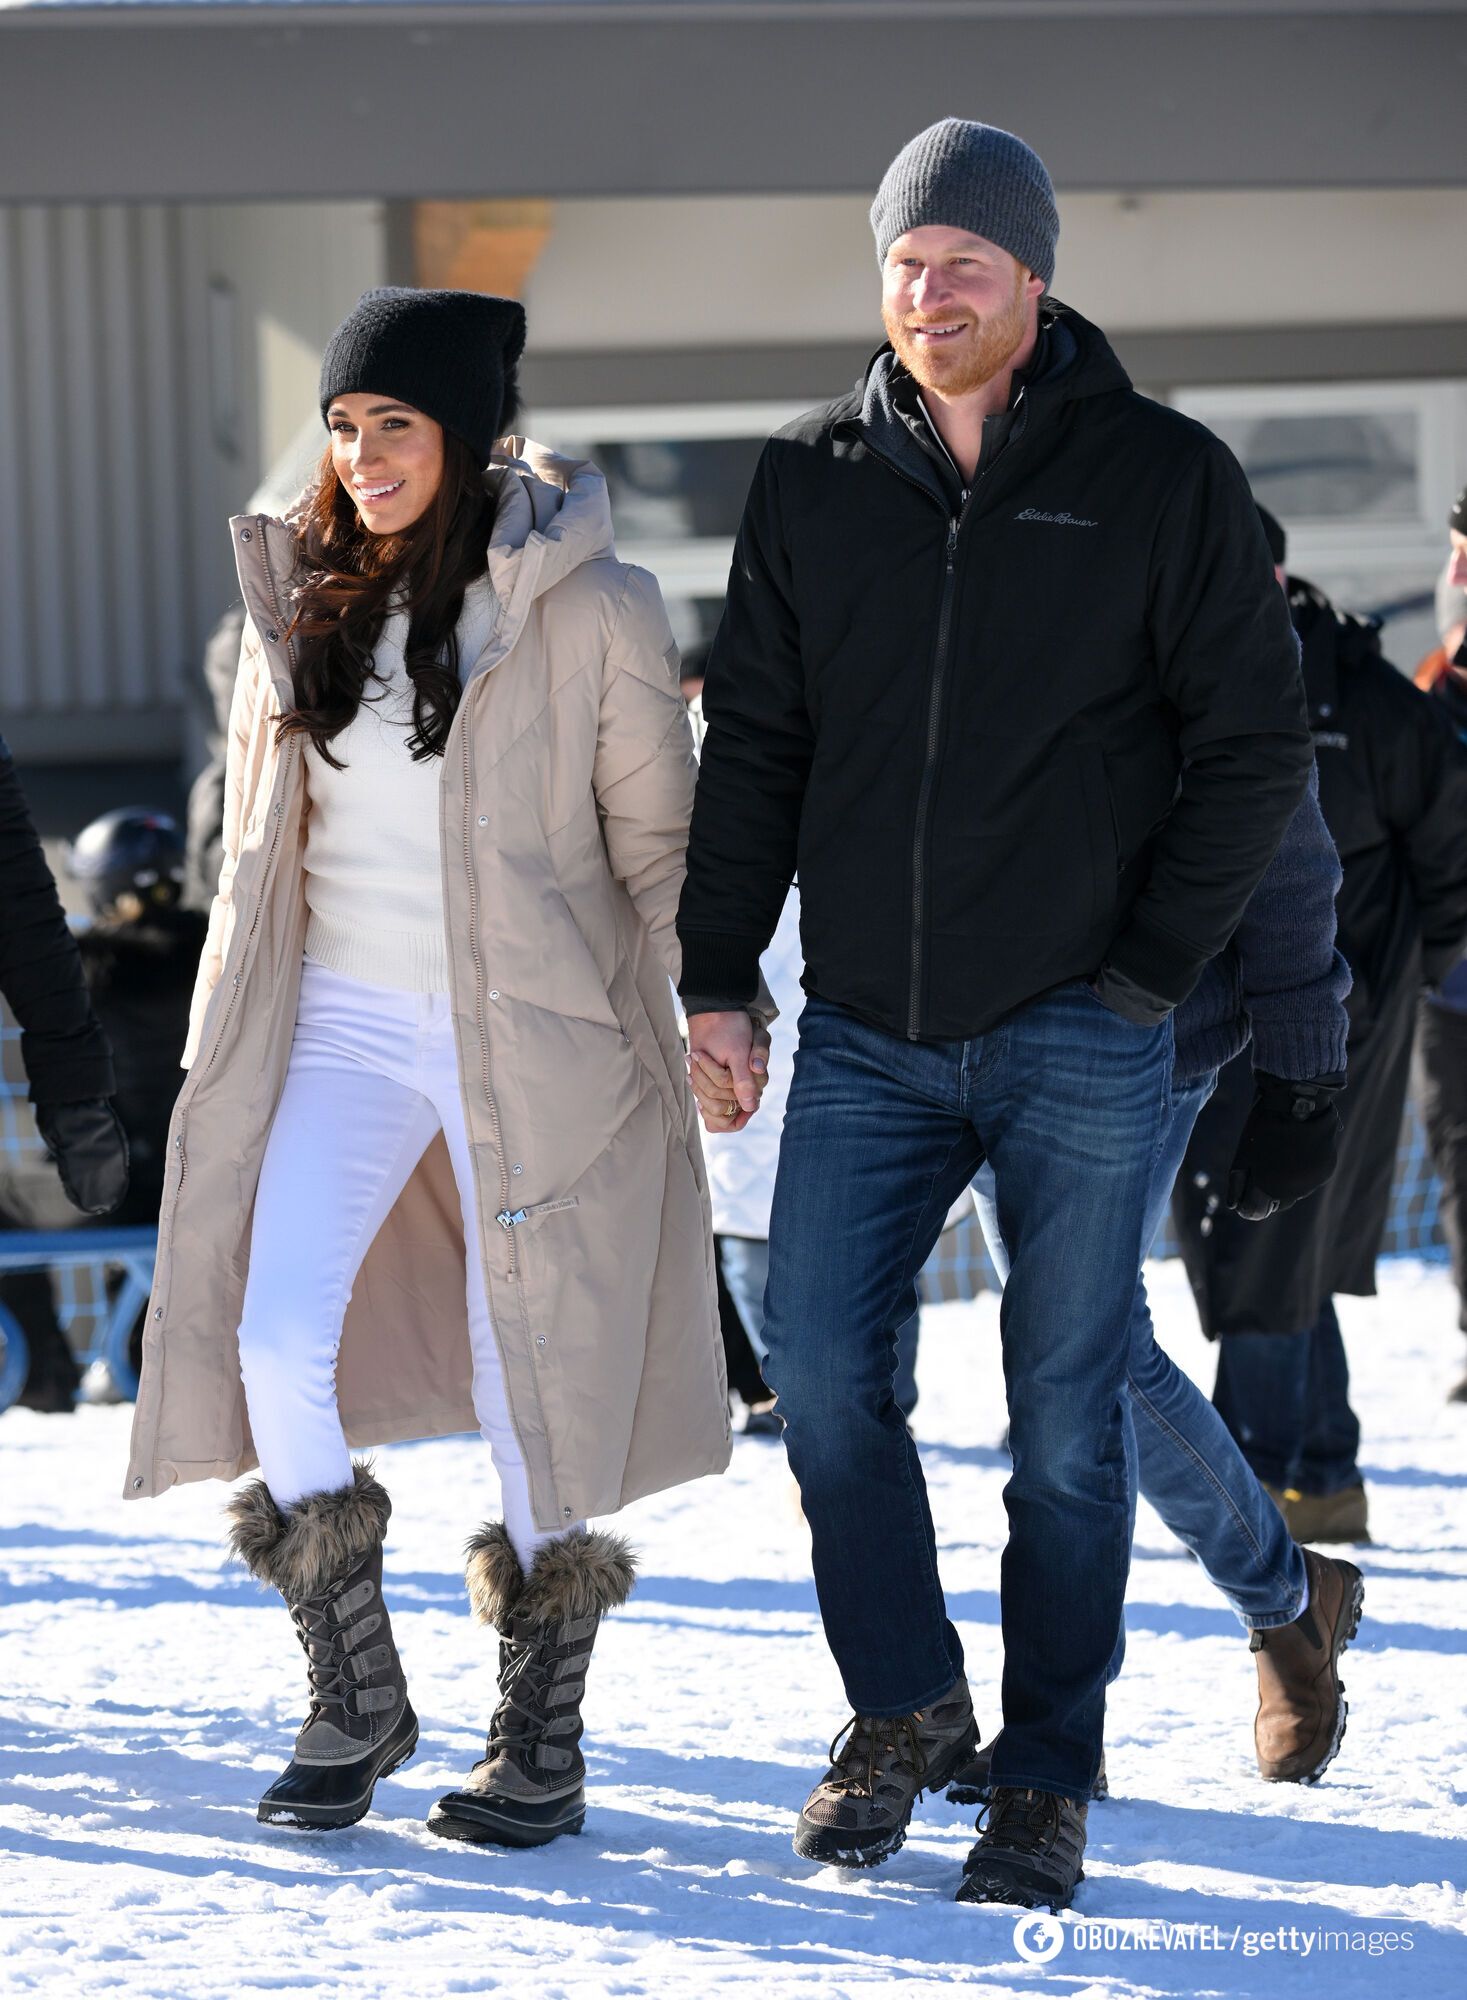 Calvin Klein down jacket and cashmere sweater by Victoria Beckham. Meghan Markle showed a stylish look at a ski resort in Canada